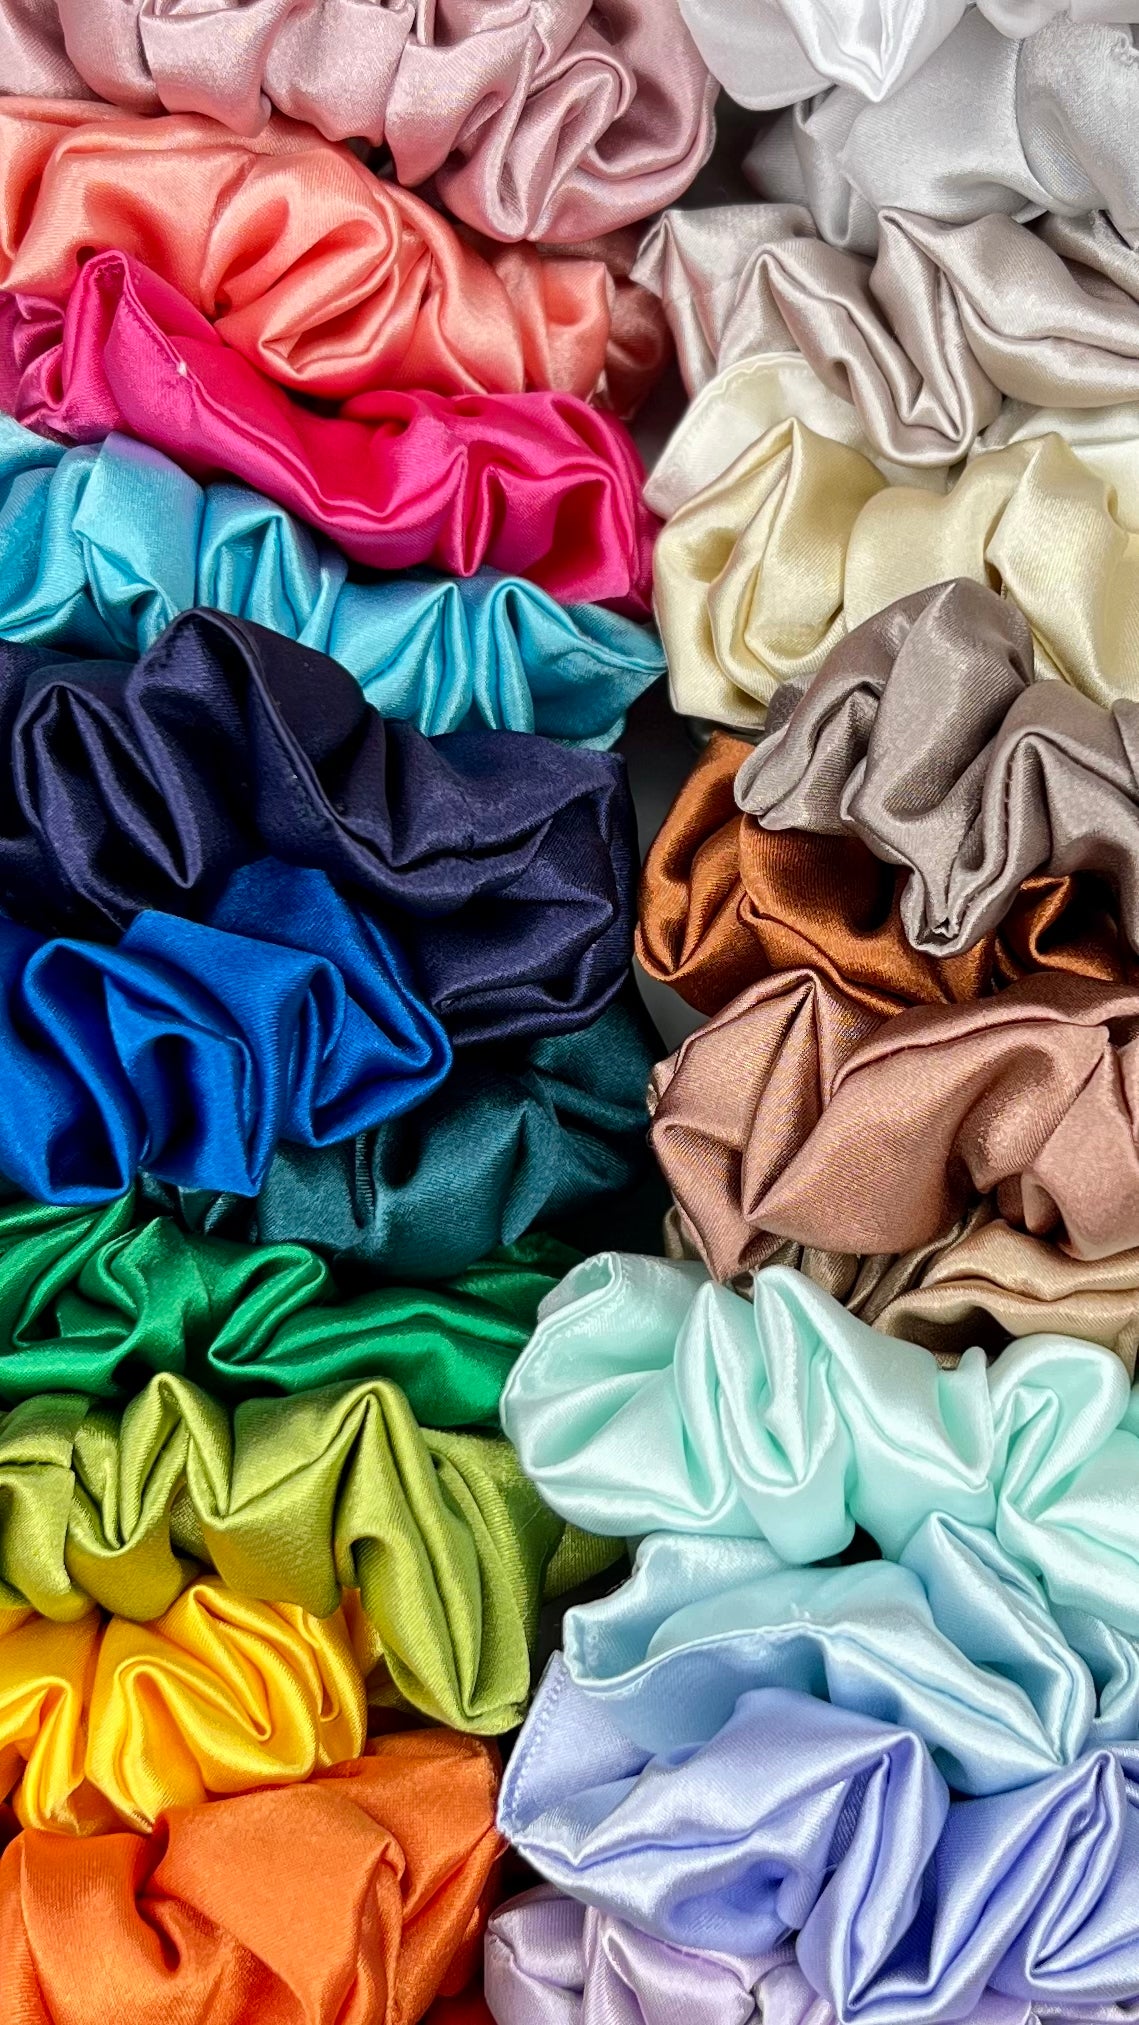 Berry Sweet Regular Satin Scrunchies: Satin scrunchies are our top seller, a crowd favourite! Super stretchy and comfortable to wear - you won't be disappointed! This scrunchie comes in a variety of gorg - Ciao Bella Dresses 